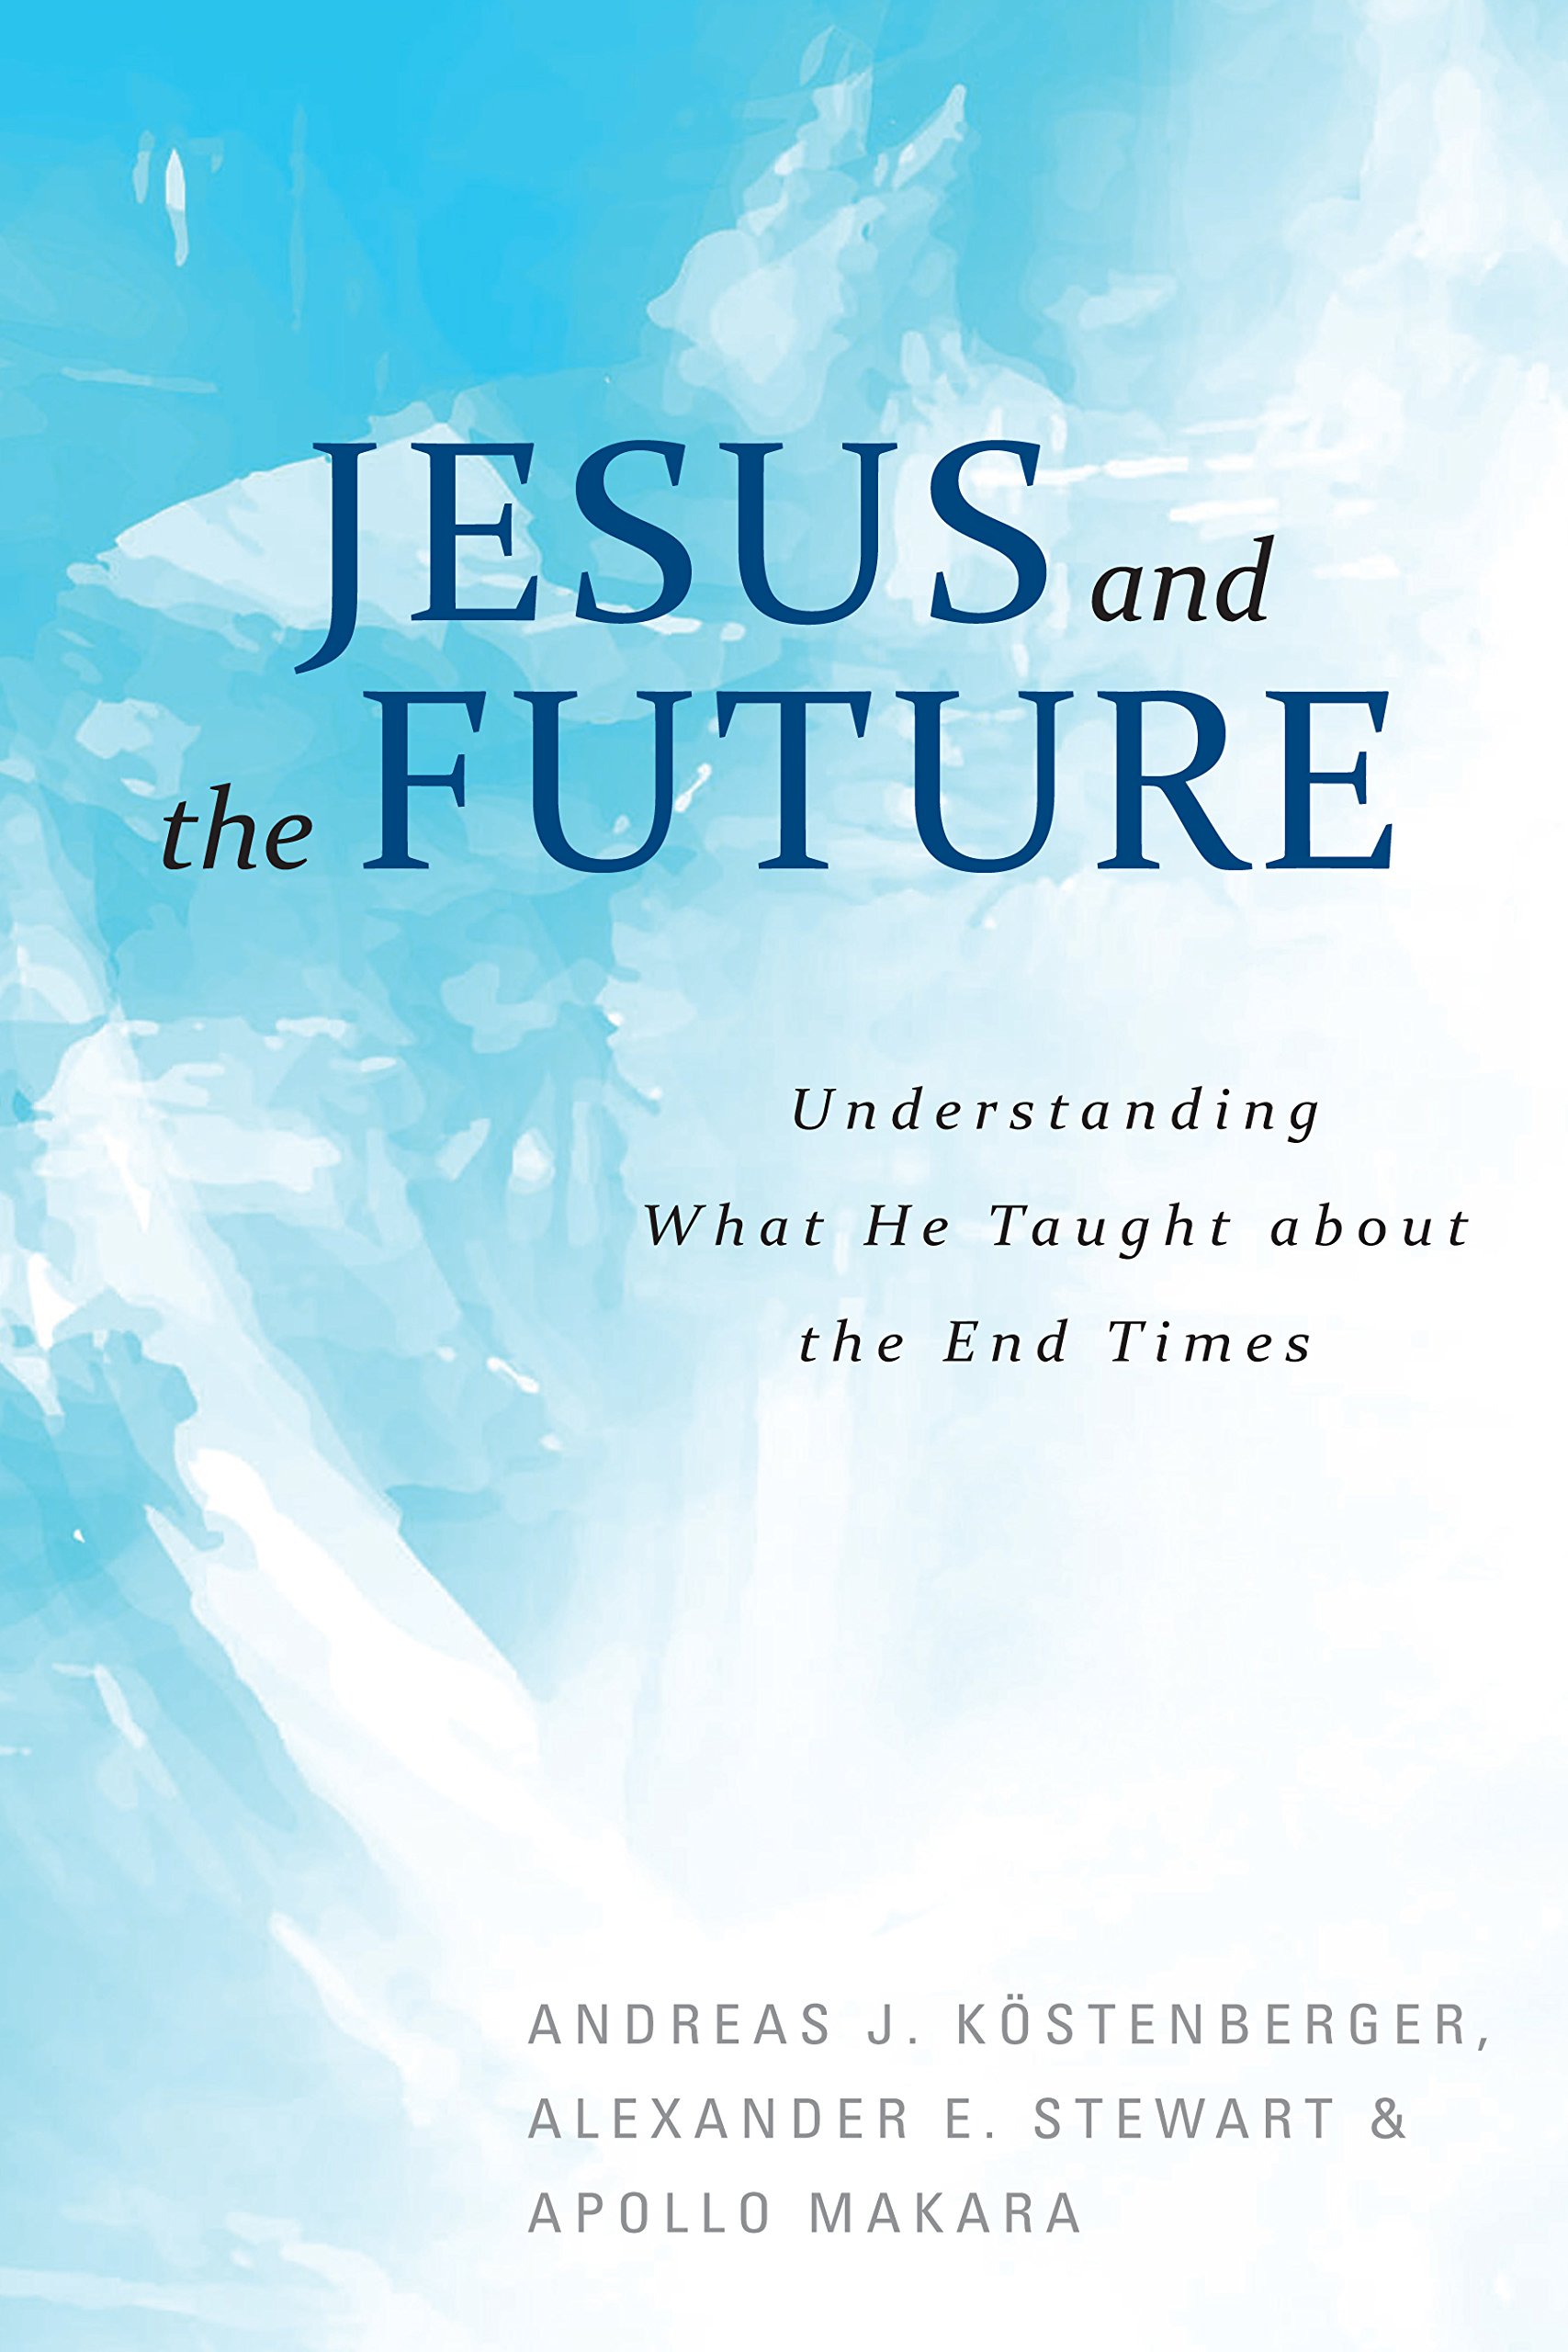 A Brief Book Notice: JESUS AND THE FUTURE: UNDERSTANDING WHAT HE TAUGHT ABOUT THE END TIMES, by Andreas J. Köstenberger, Alexander E. Stewart, and Apollo Makara